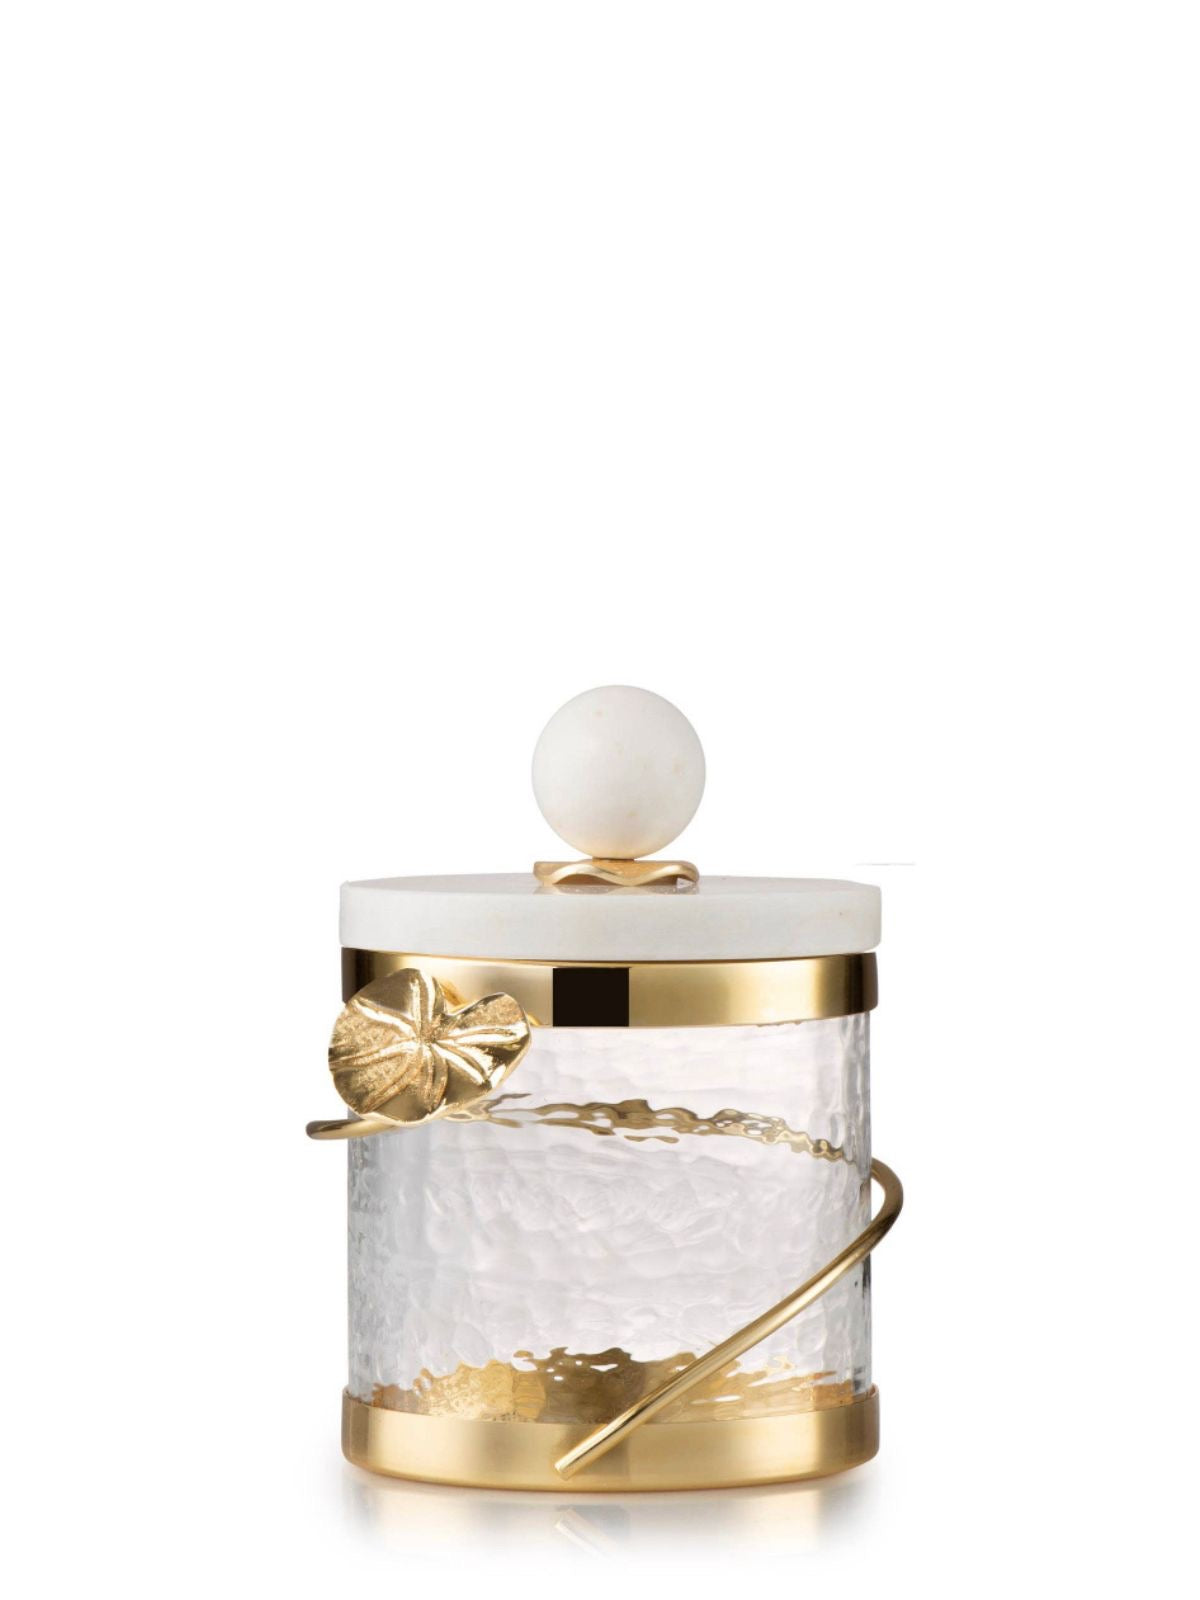 The Cuore D’ Oro Glass Canister Has A Gold Leaf Design & Marble Lid Small Size From KYA Home Decor